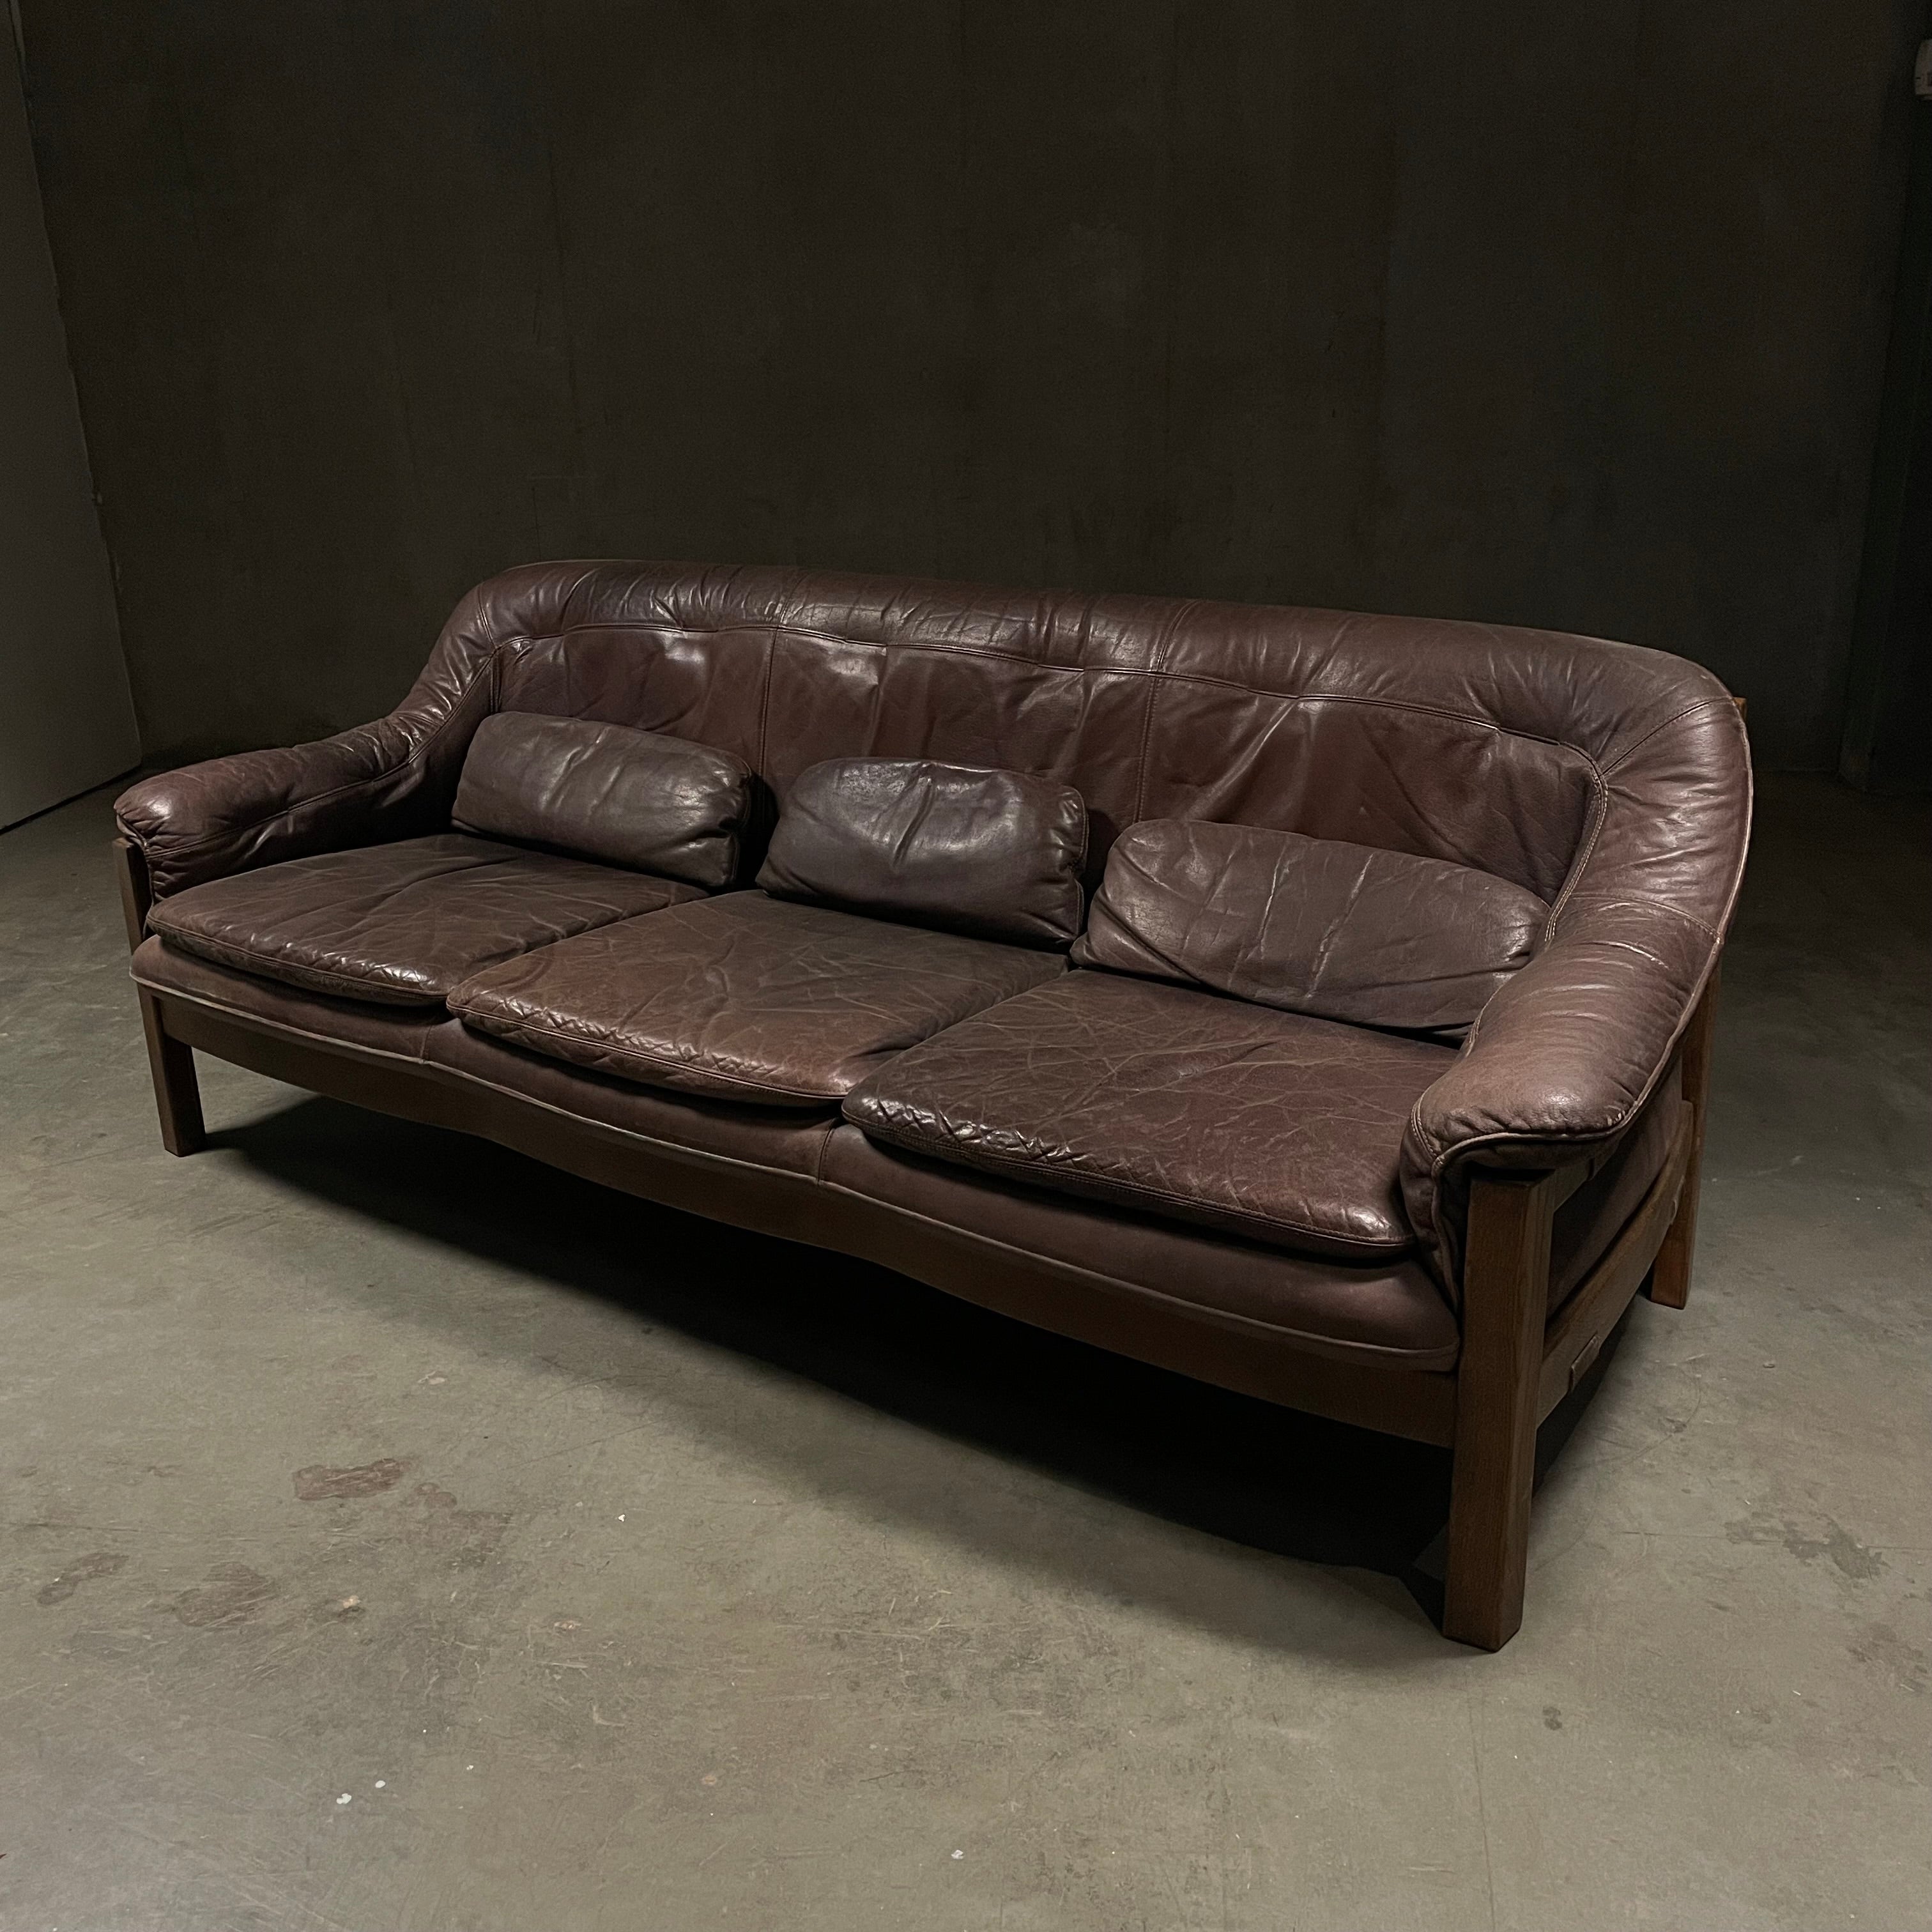 1968-70 German Leather Sofa by Polstermobel